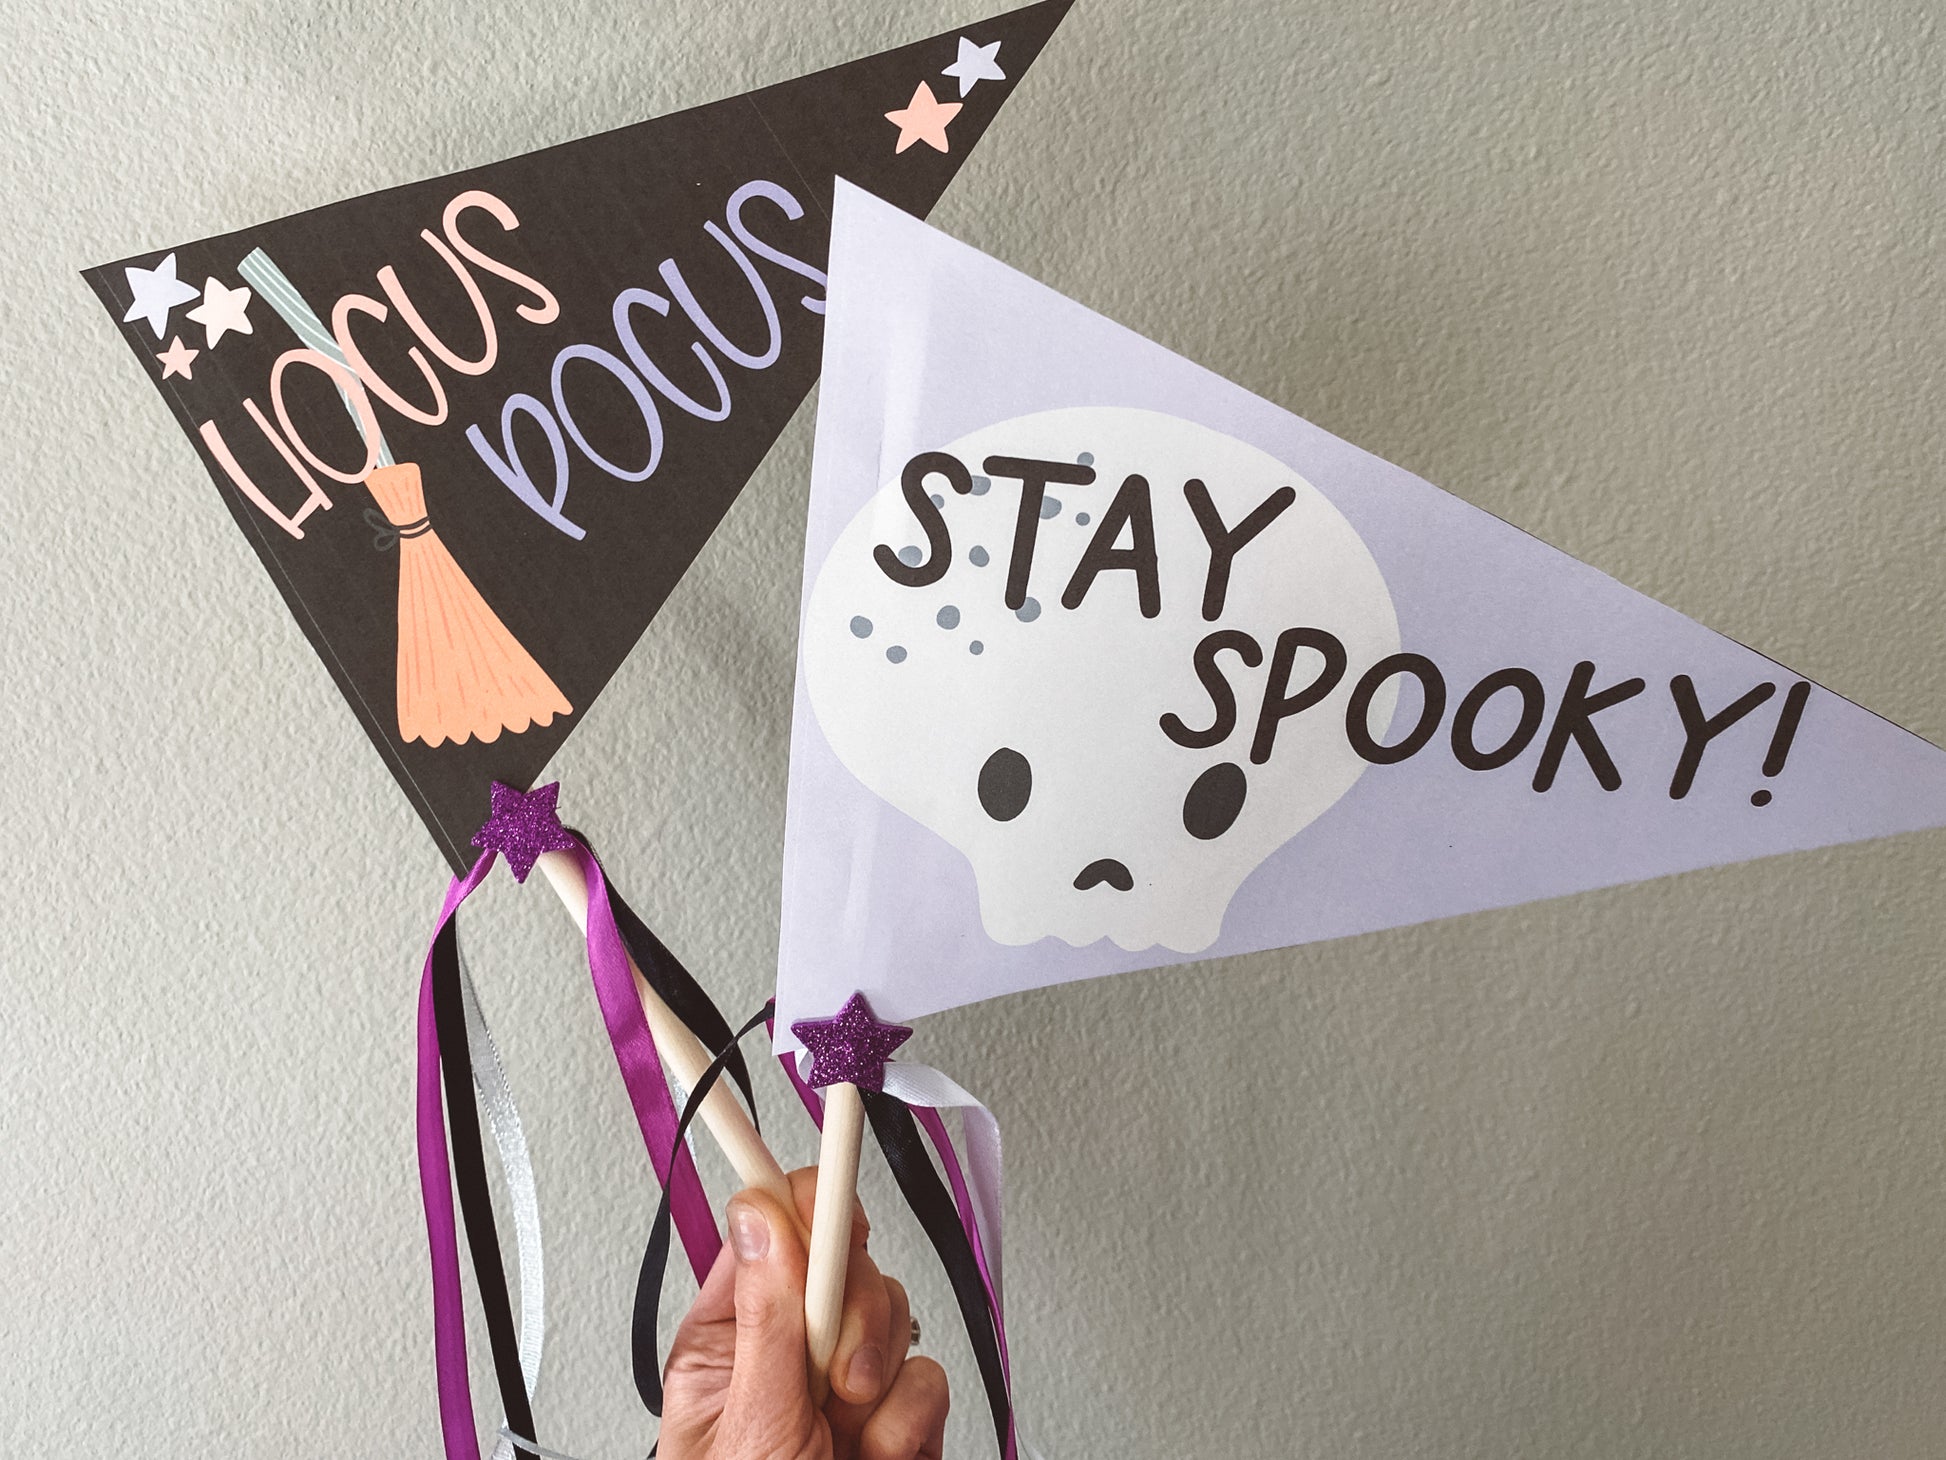 Hocus Pocus flag is black. Hocus is in light orange. Pocus is in light purple. Broom in the background and stars in two of the corners. Stay Spooky flag is light purple with black text and a cute white skull in the background.